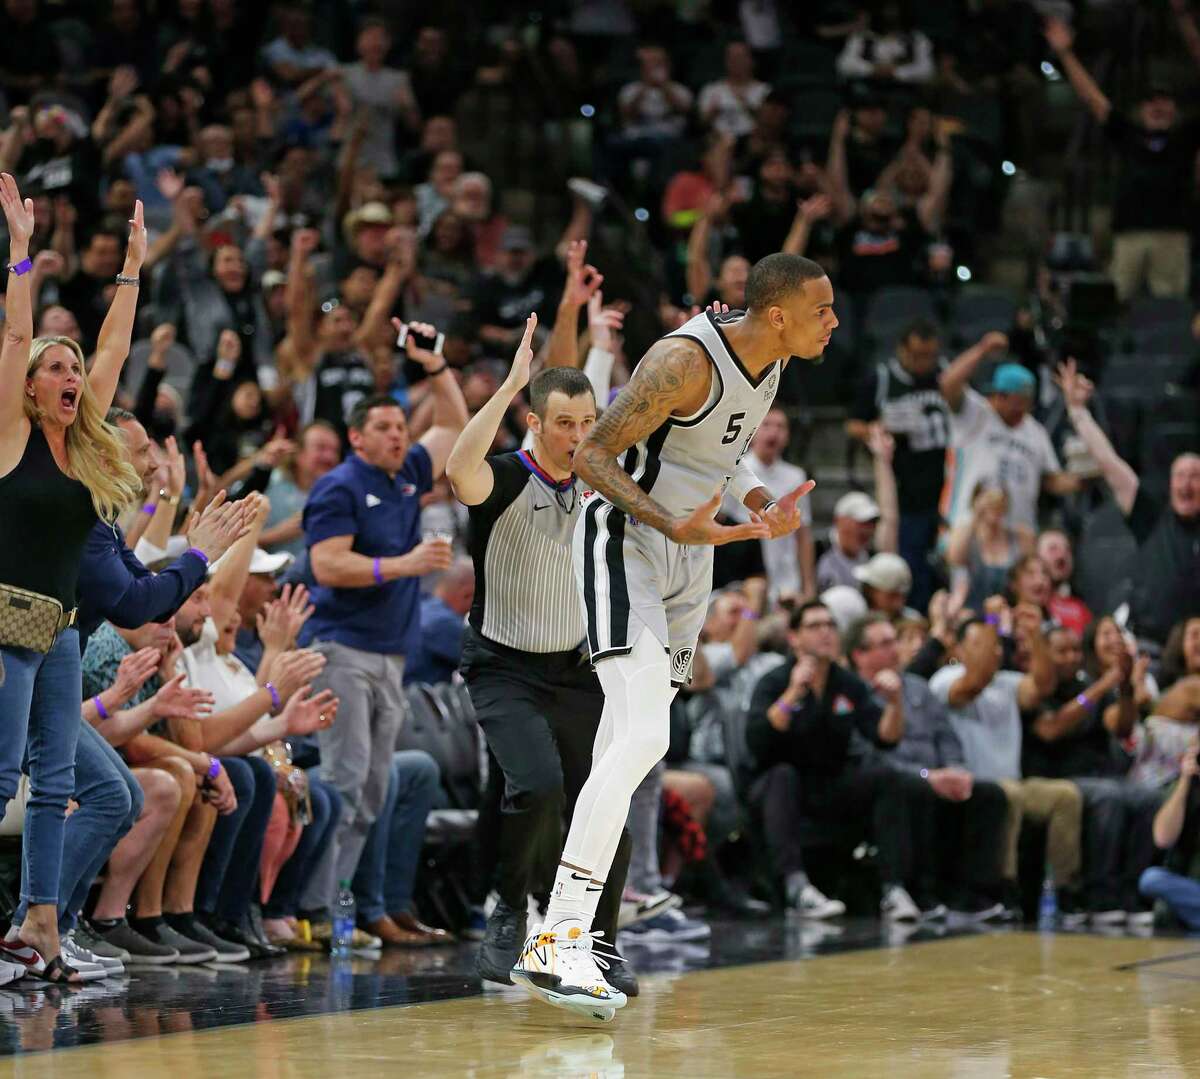 Crowd cheers after a three by San Antonio Spurs guard Dejounte Murray (5) in second half. Memphis Grizzlies defeated the San Antonio Spurs 112-111on Wednesday, March 30, 2022 at the AT&T Center.